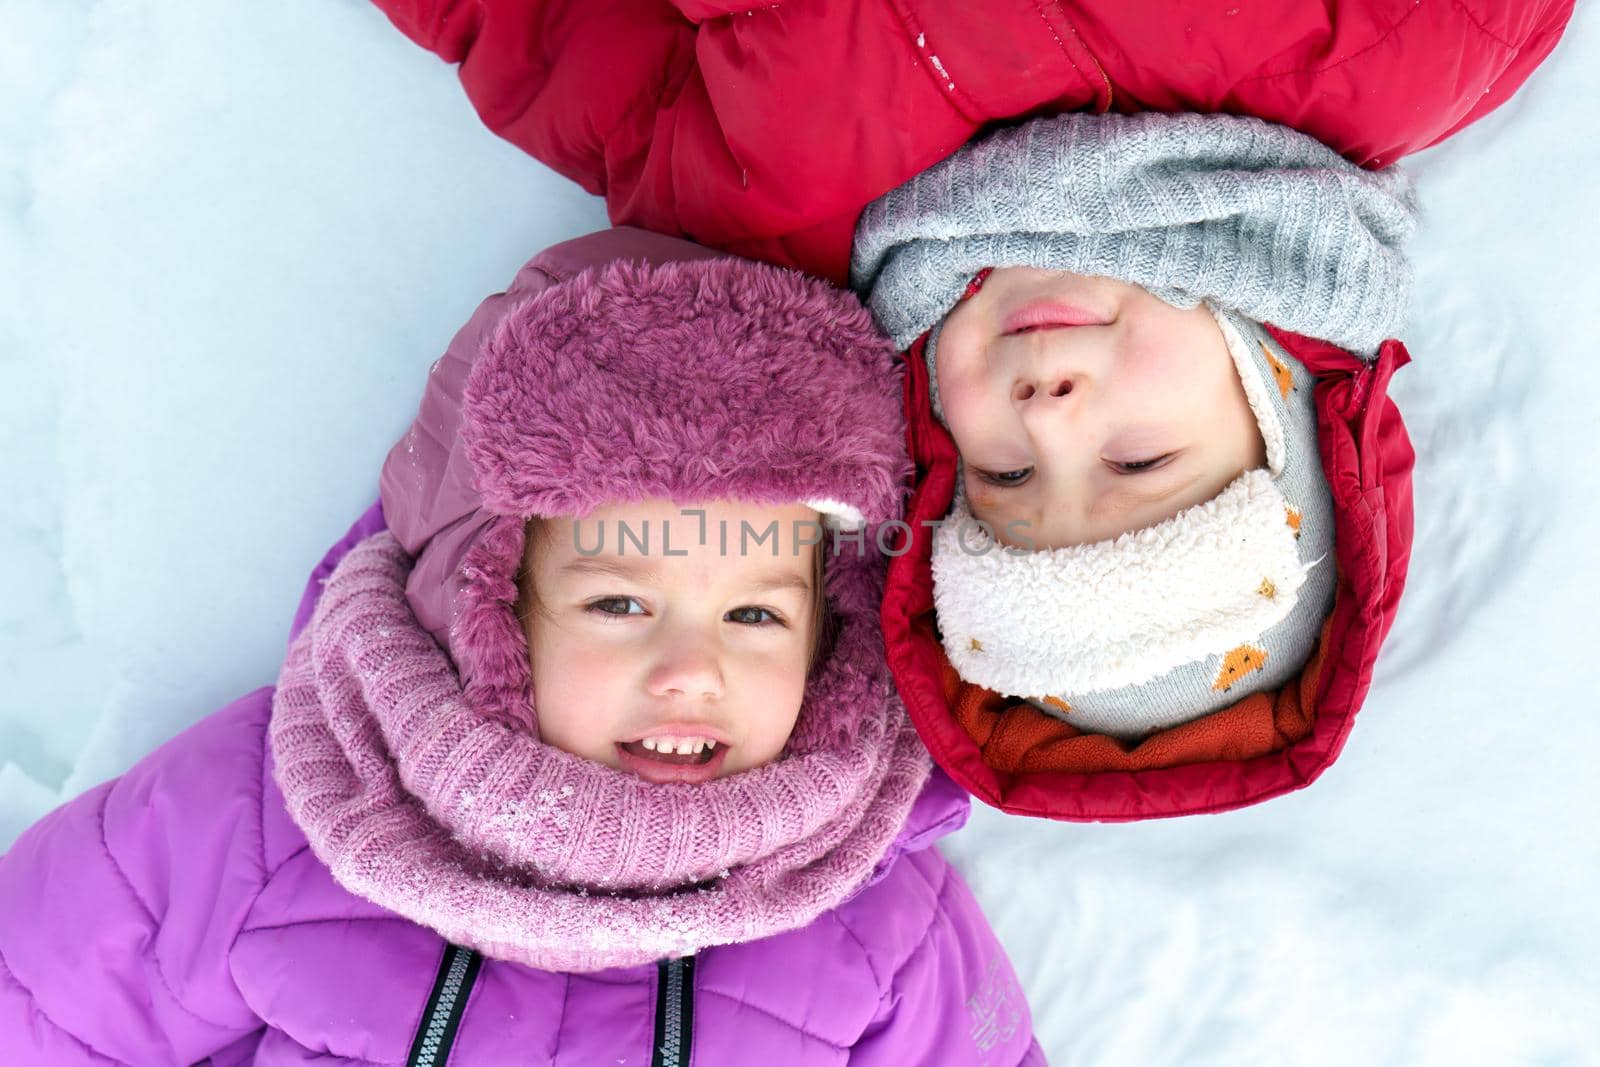 Childhood, snowy time, winter holidays cold weather. Close up portrait little preschool happy Children boy girl face, Smilling kids in warm knitted hat and scarf laying down on white snow background.